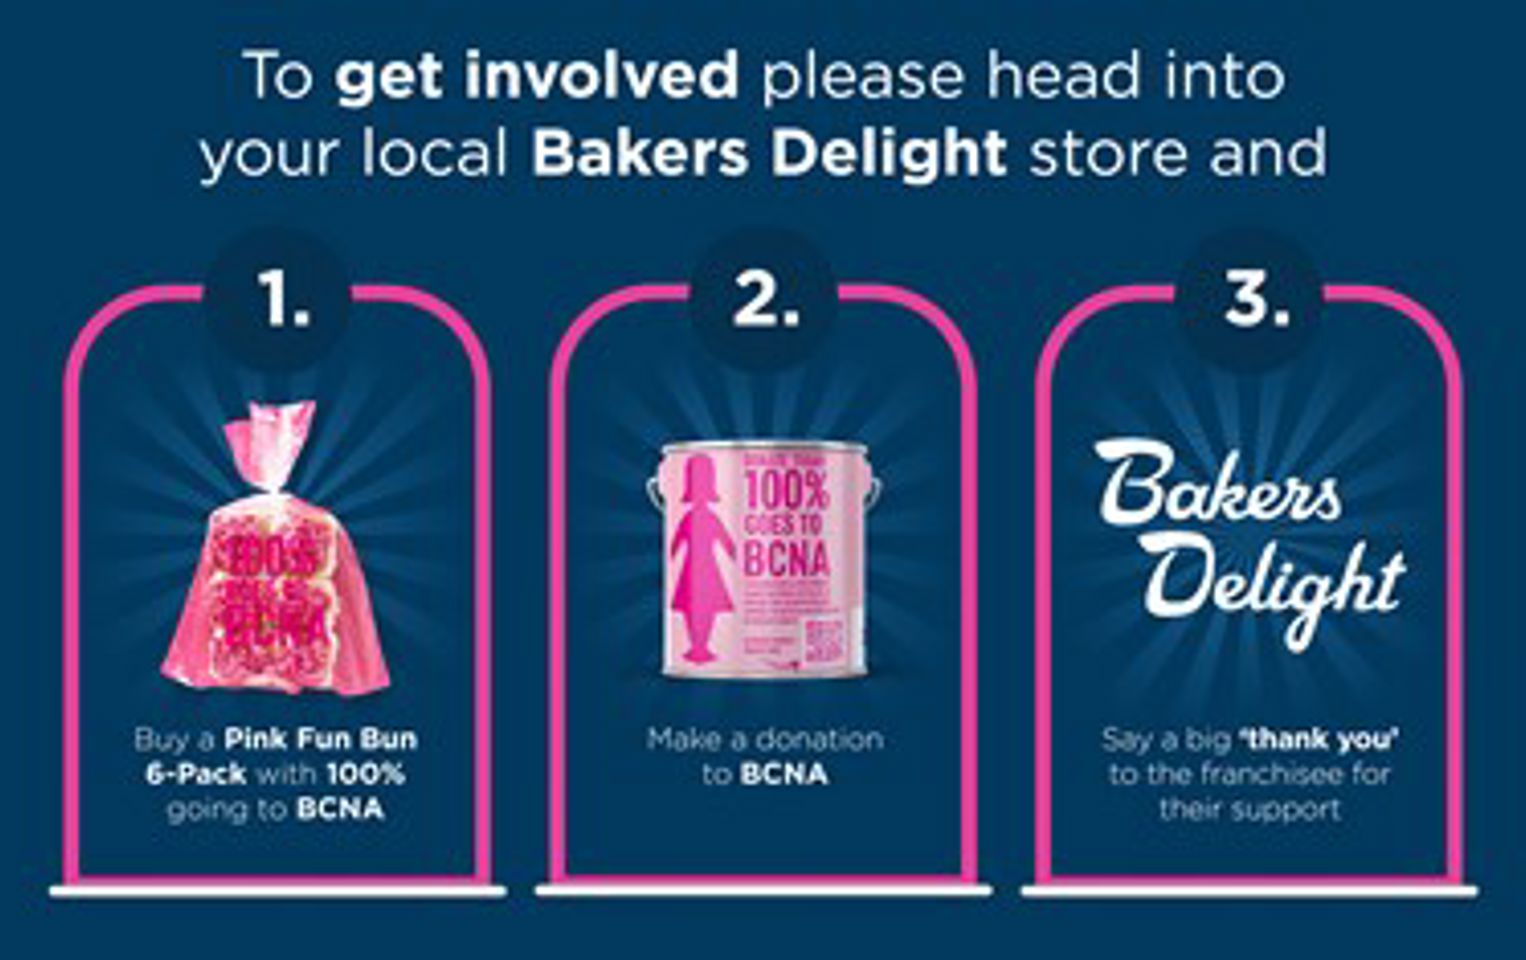 Graphic showing how to get involved in Pink Bun Day: 1. Buy a Pink Fun Bun, 2. Make a donation to BCNA, 3. Say a big 'thank you' to the franchisee